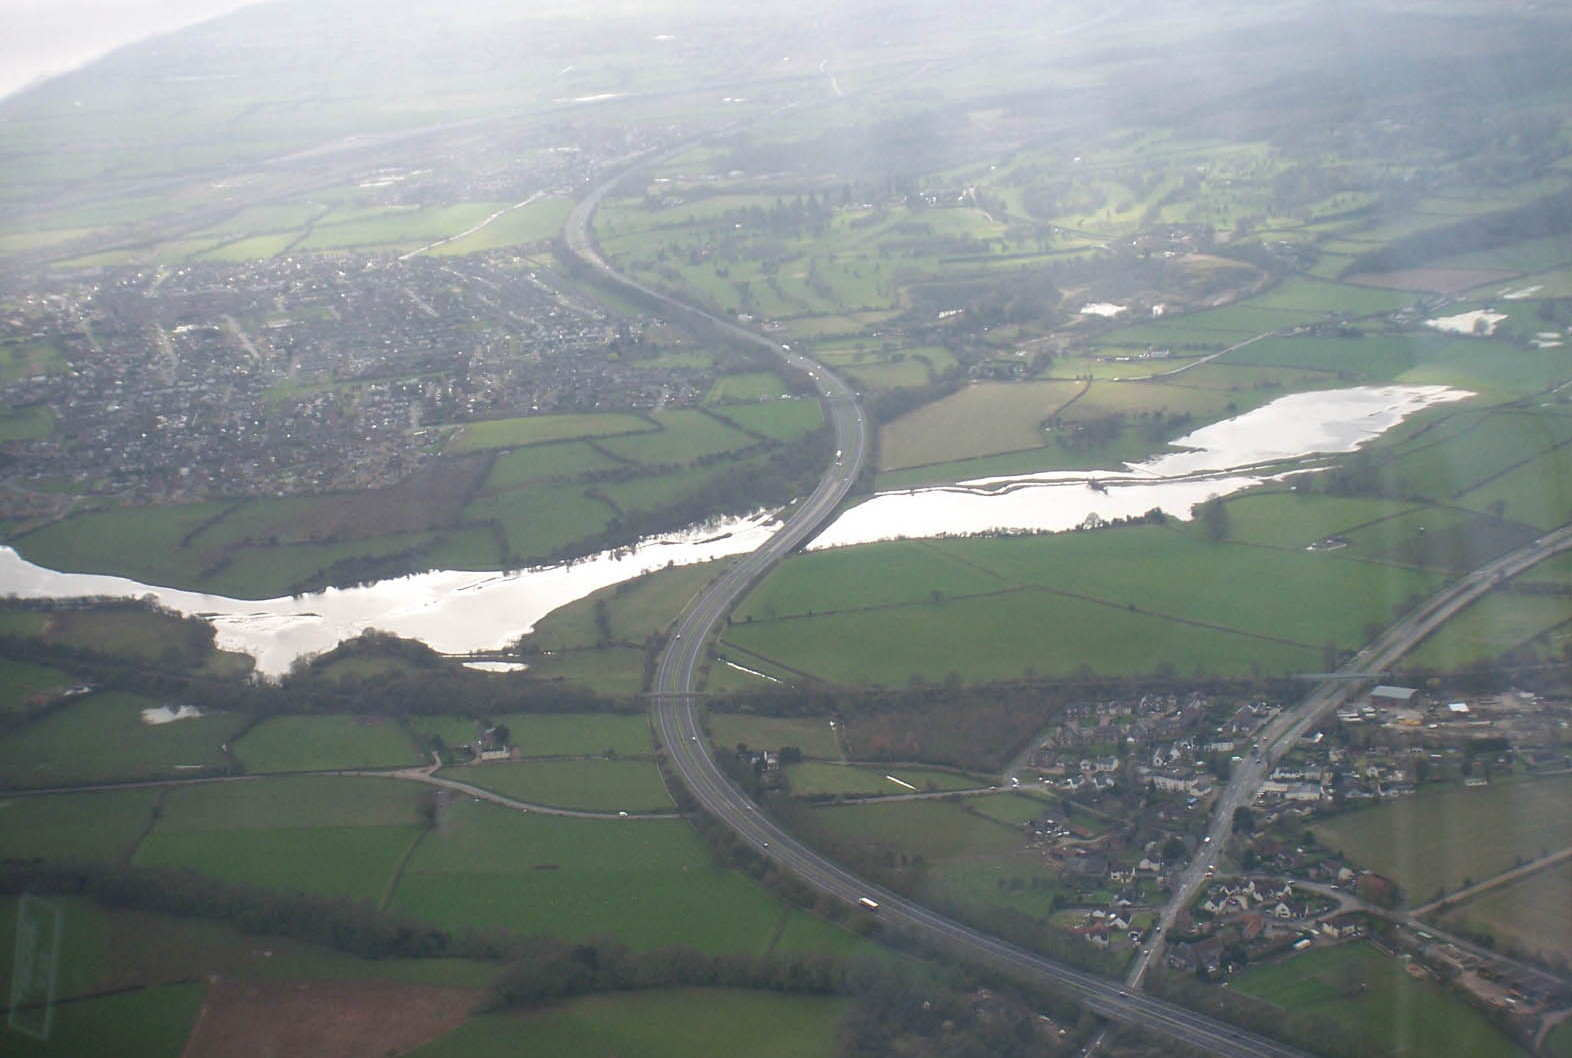 aerial view of a long thin lake with irregular edges, shining like quicksilver, unrolled from right to left across a flattish landscape of fields in between a large and a small village, with a motorway snaking across the landscape and crossing the lake by bridge